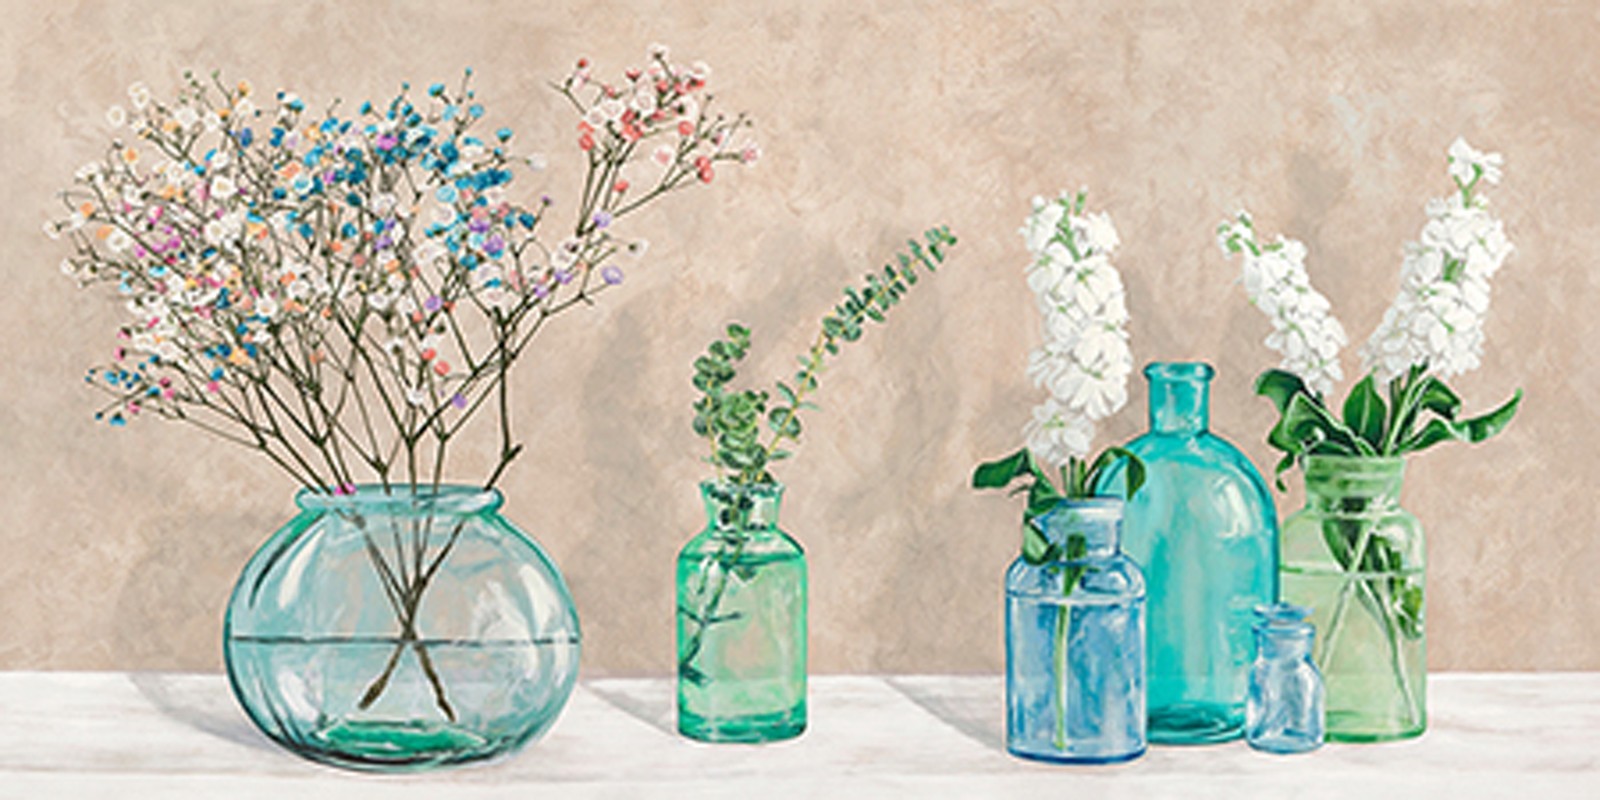 Jenny Thomlinson - Floral setting with glass vases